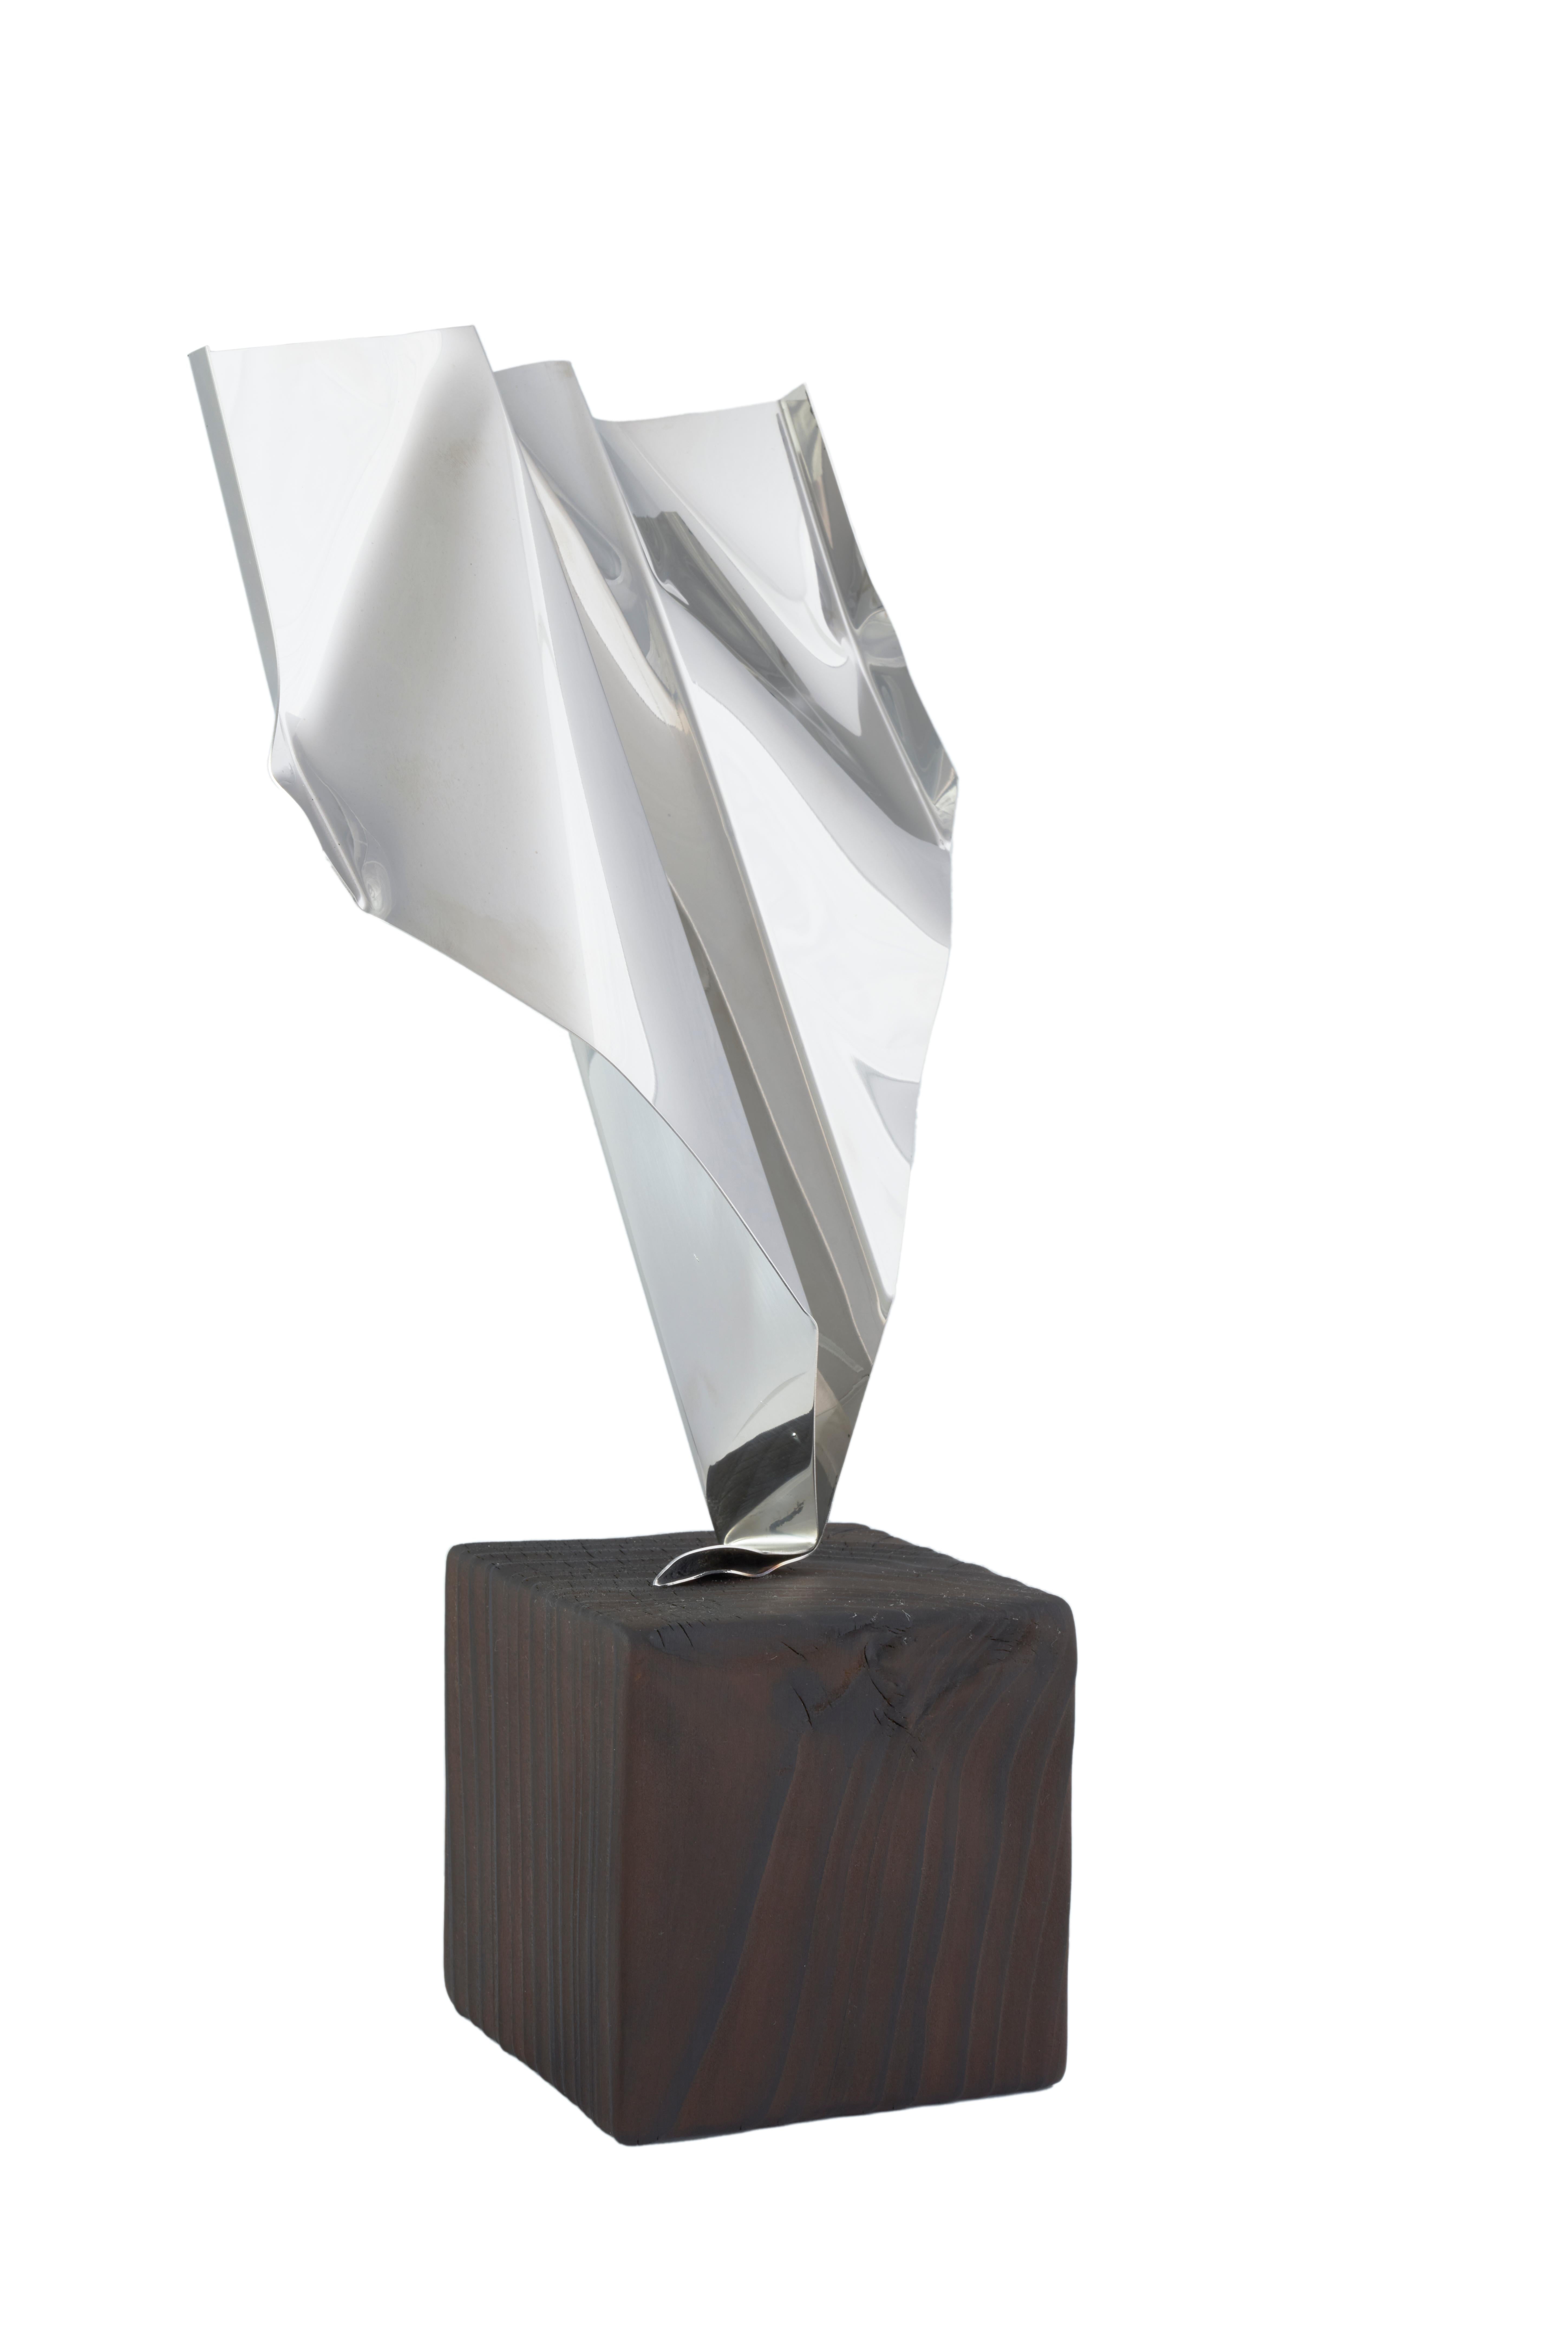 Daniele Sigalot  Abstract Sculpture - Daniele Sigalot, Clearly not a paperplane, 2021, Sculpture, silver